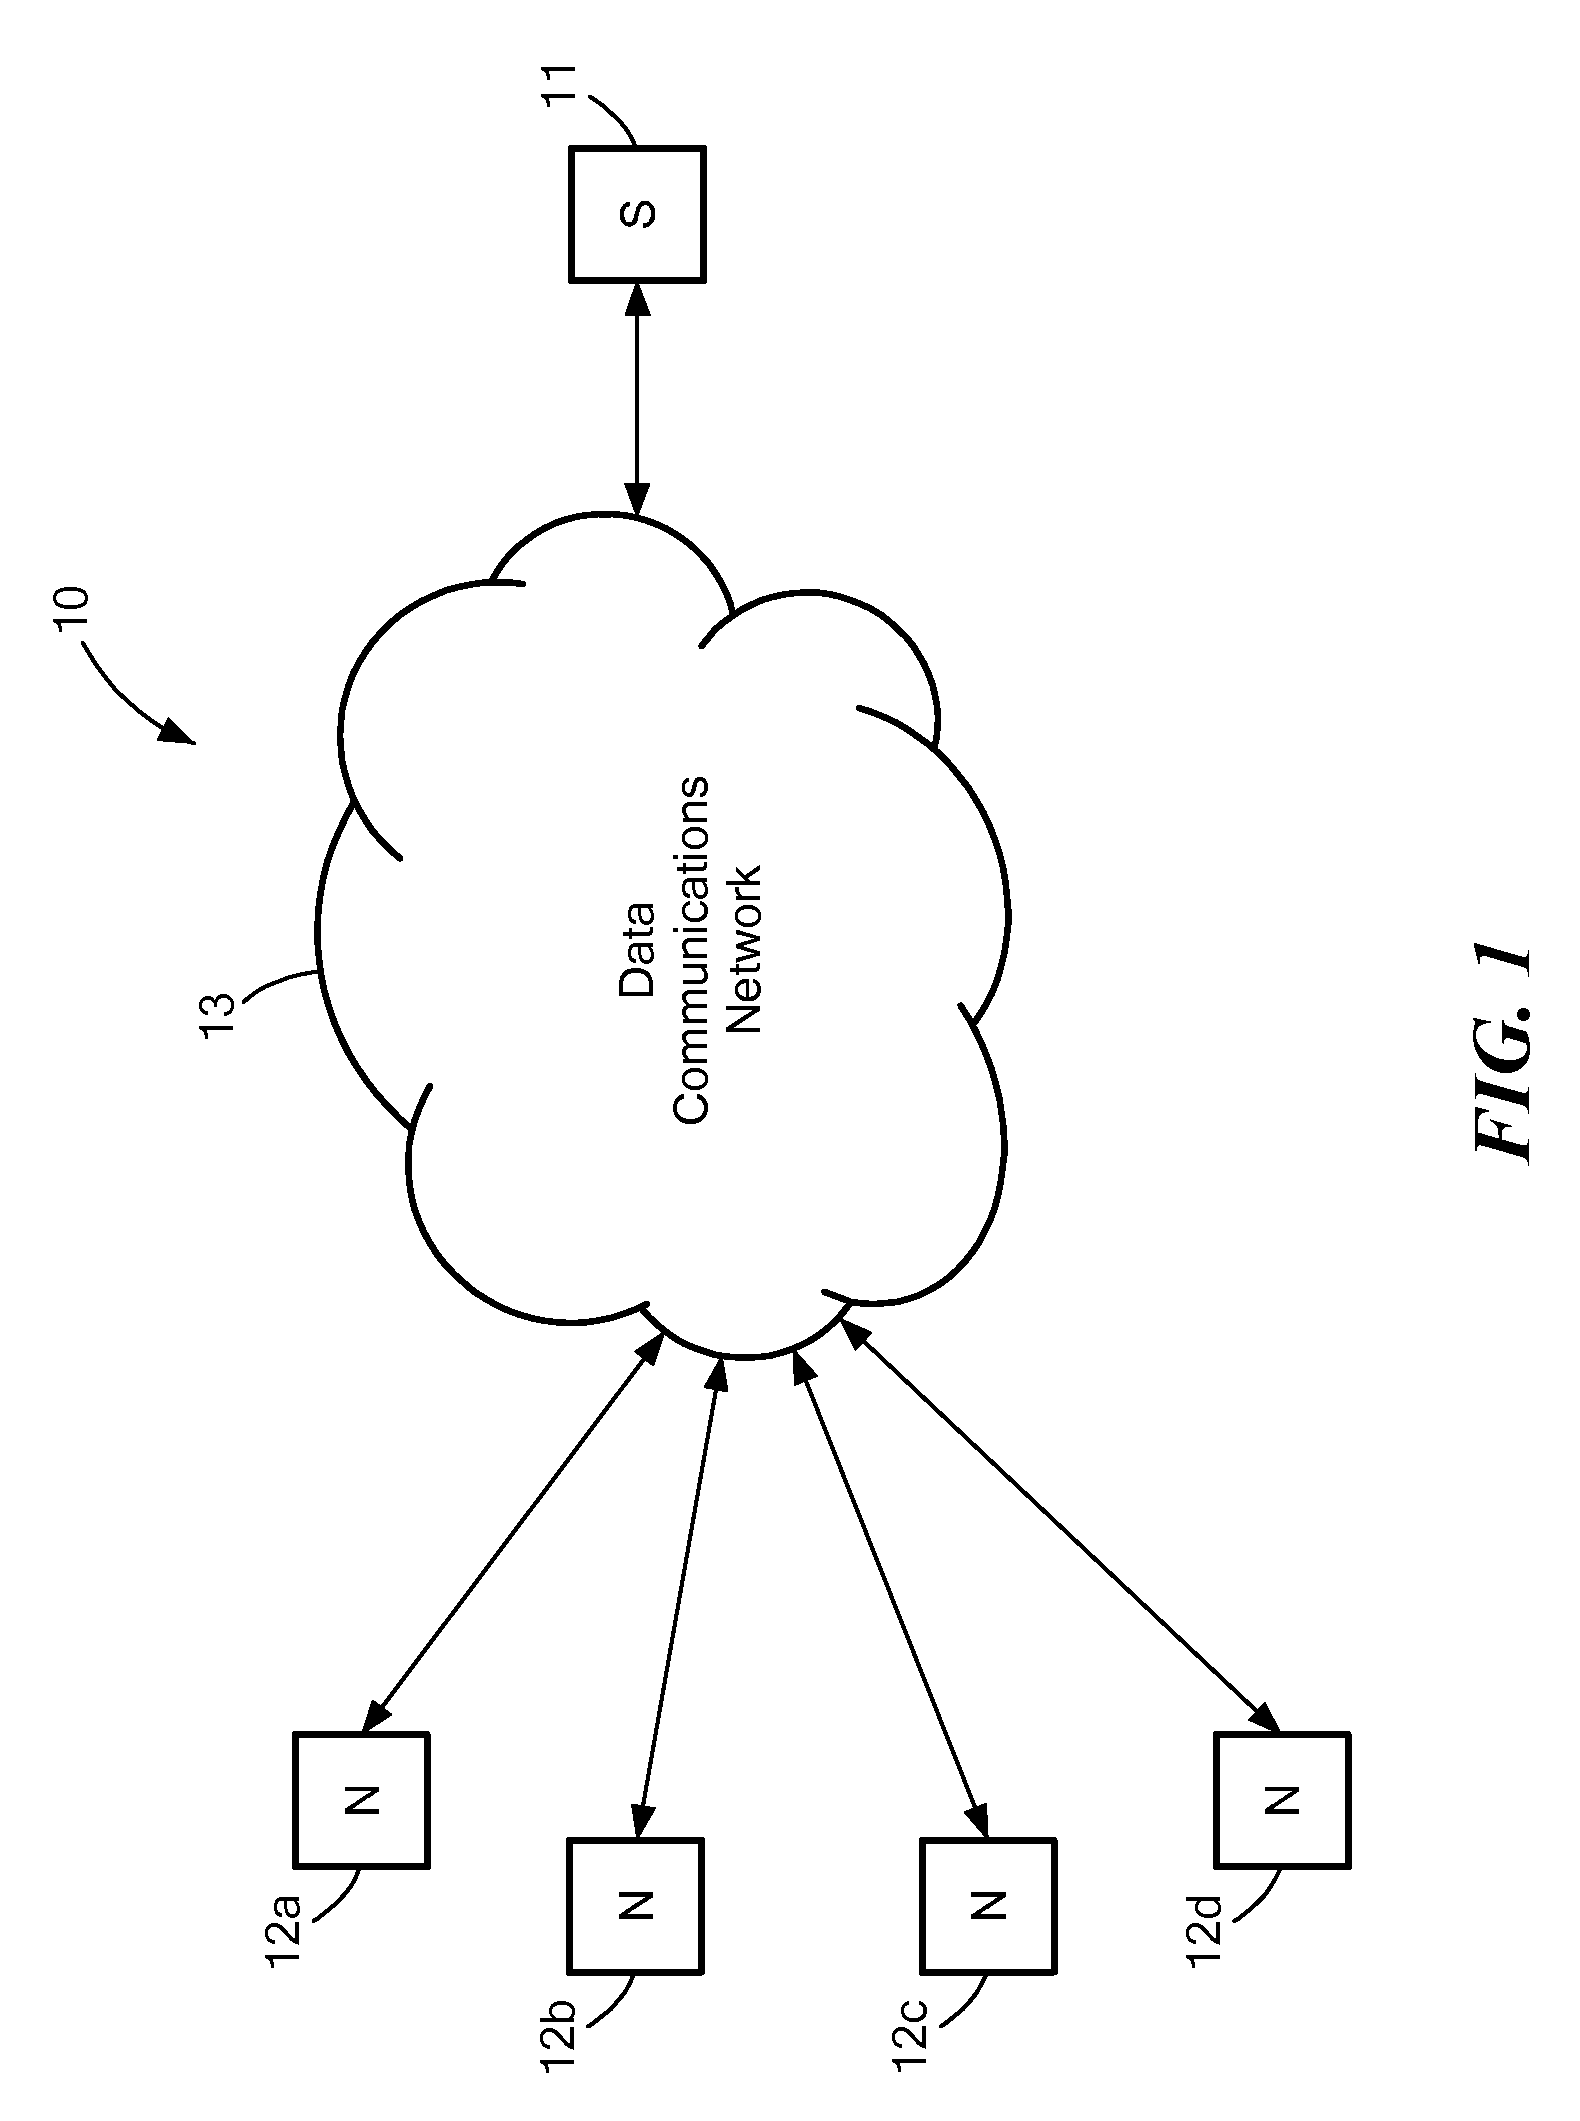 Apparatus and method of objectively rating members of an online group